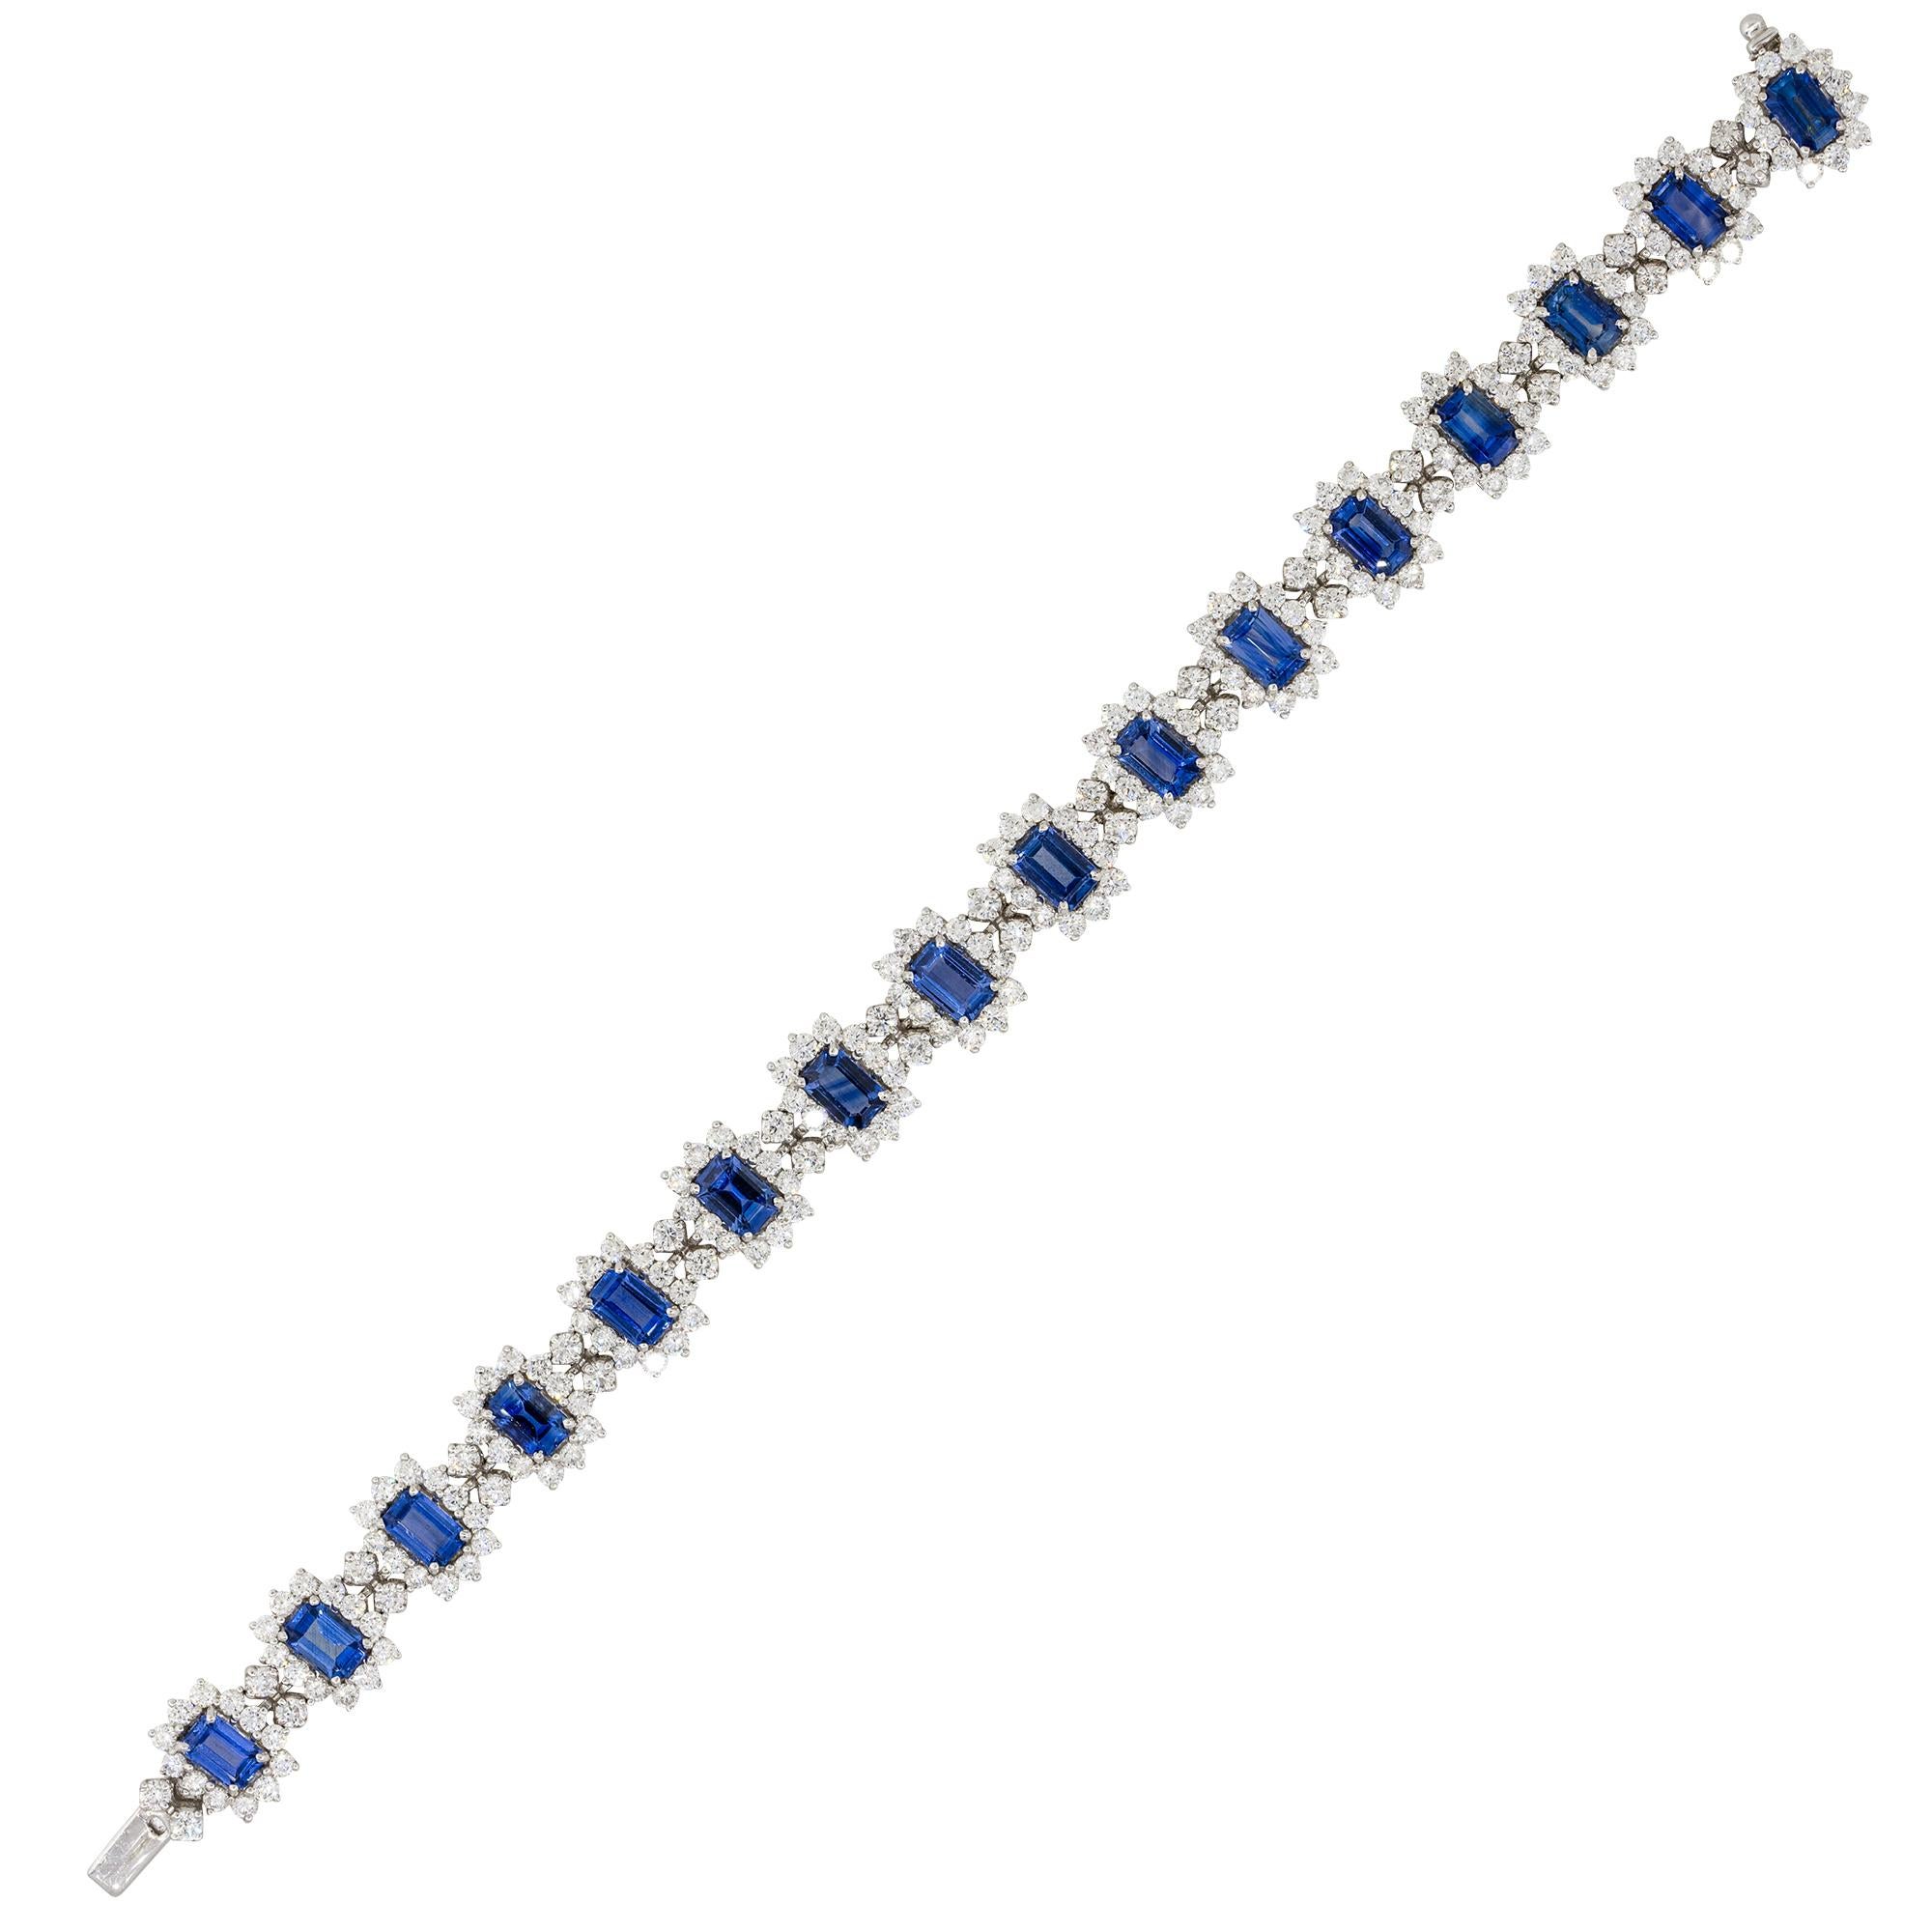 Material: 18k White gold
Diamond details: Approximately 7.17ctw of round brilliant diamonds. Diamonds are G/H in color and SI in clarity
Gemstone details: Approximately 10.77ctw of oval cut sapphires. 
Wrist size: Will fit up to a 7